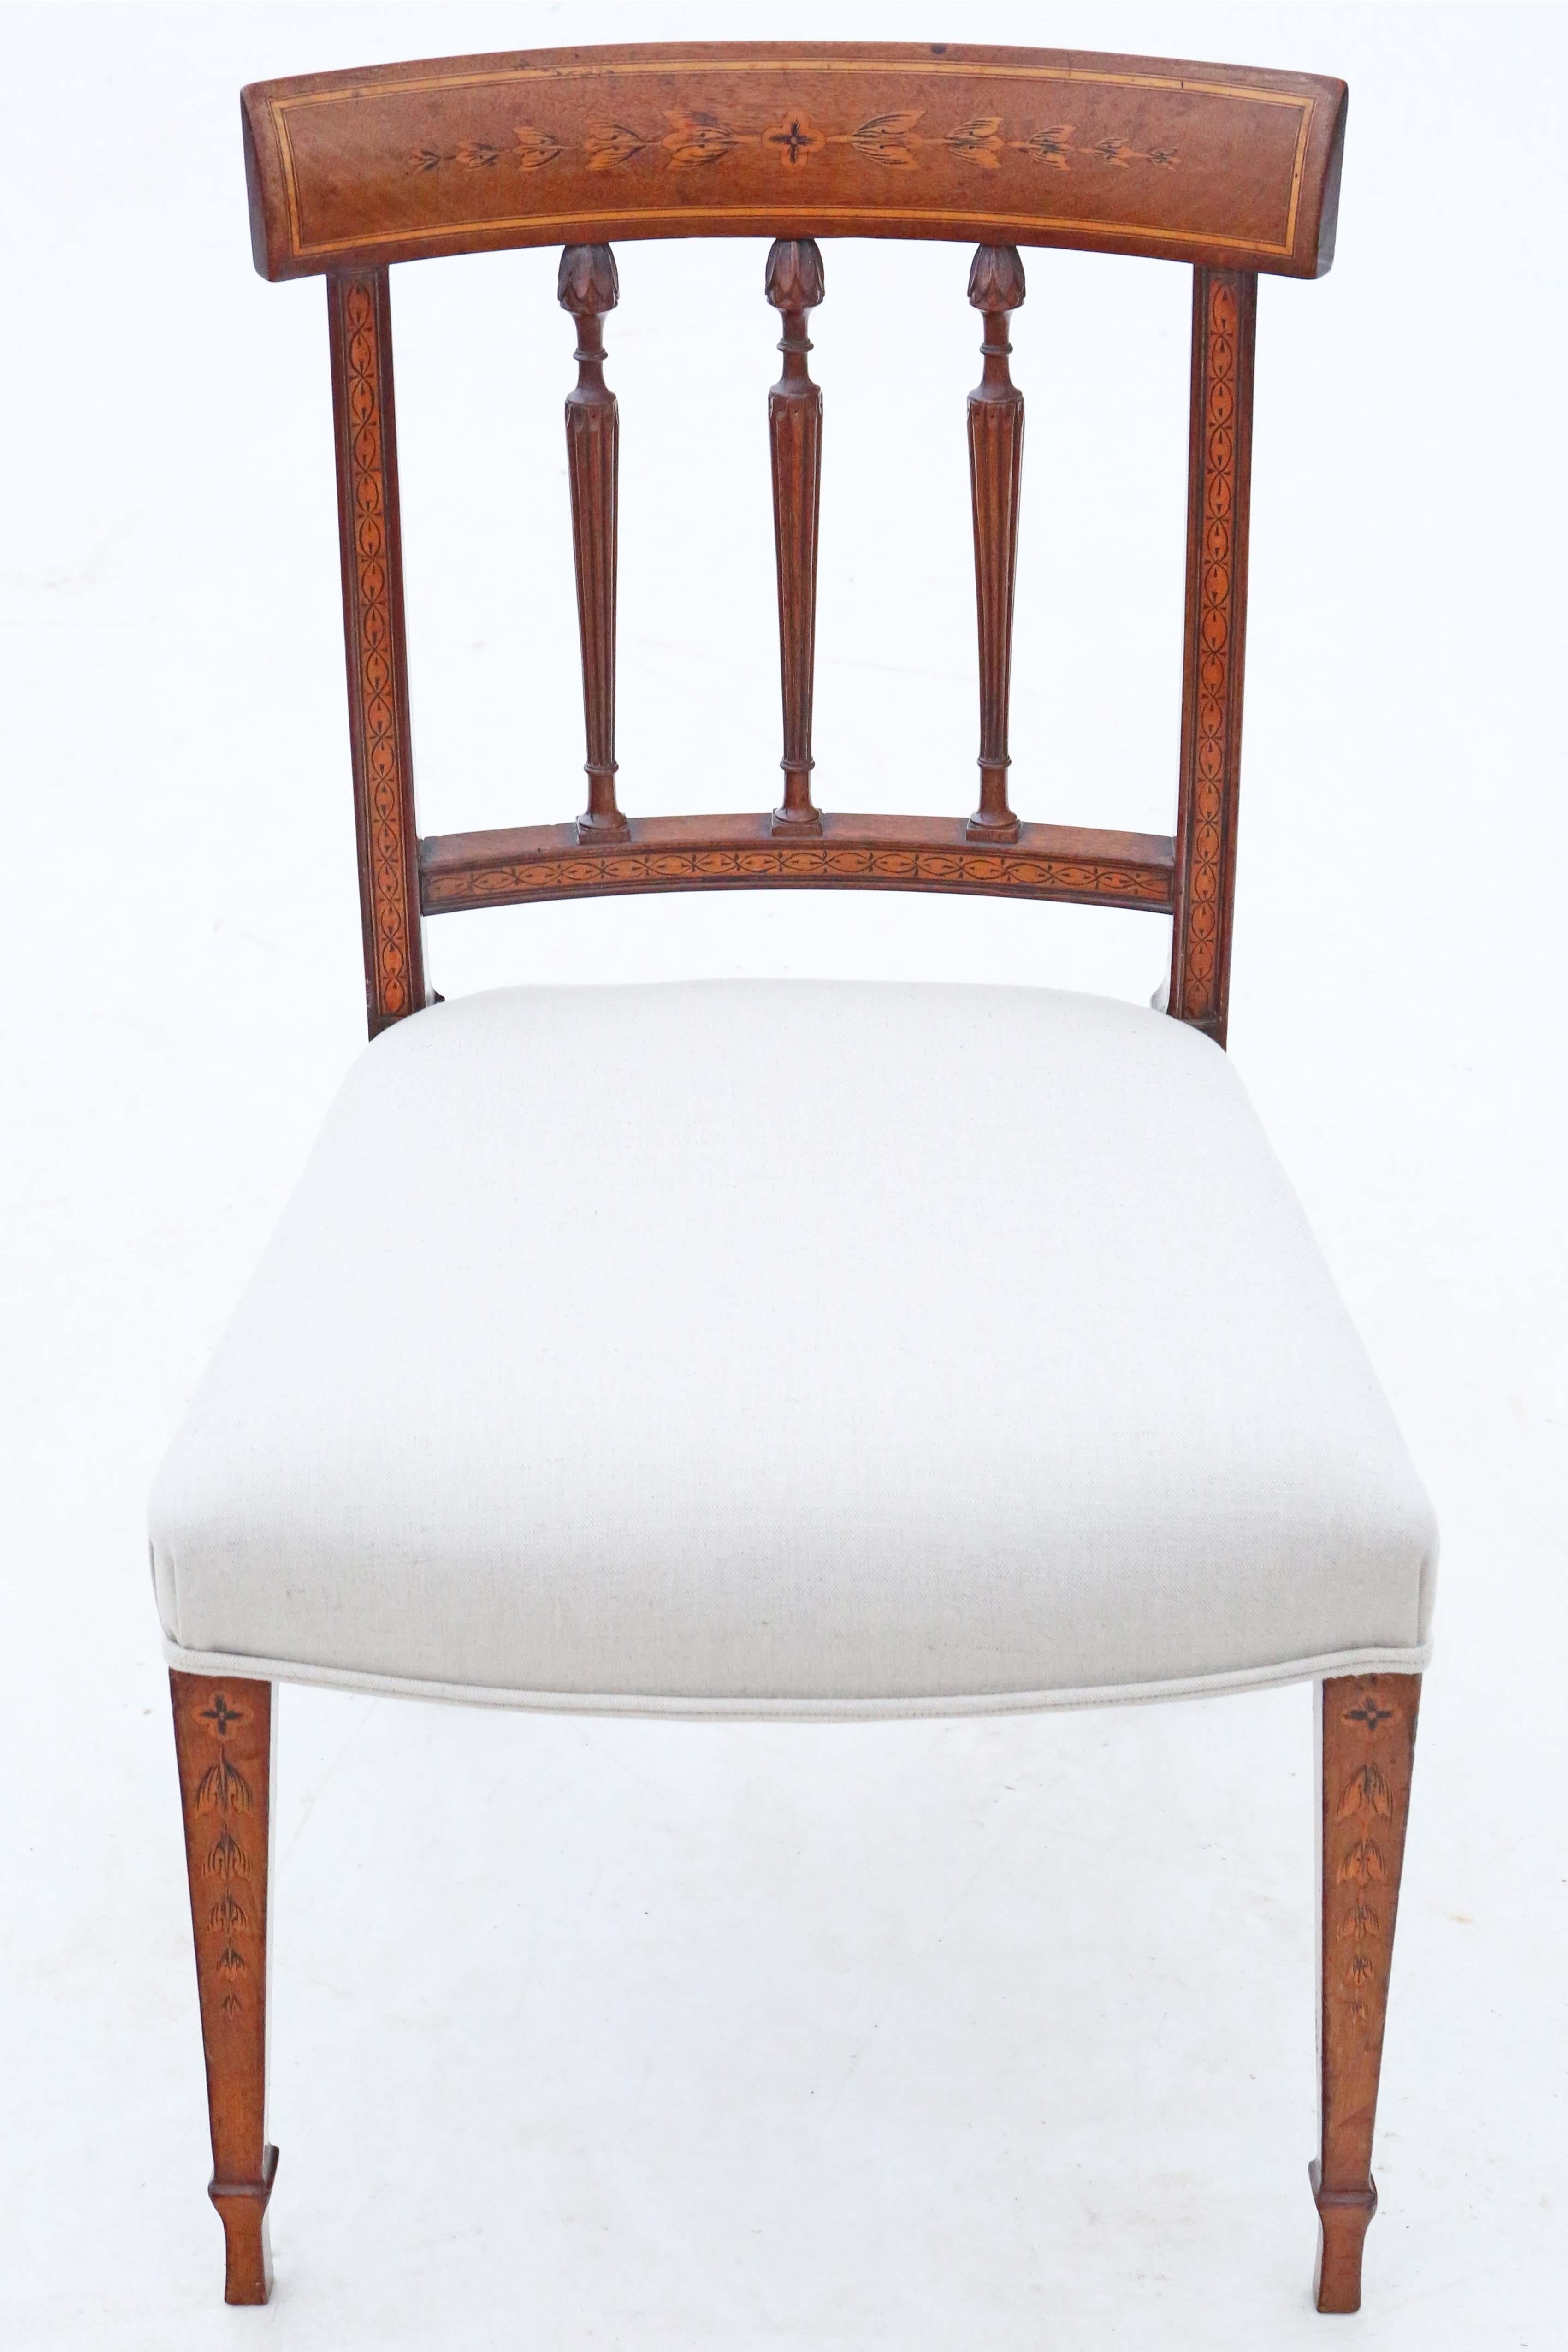 Early 19th Century Mahogany Marquetry Dining Chairs: Set of 8, Antique Quality For Sale 1